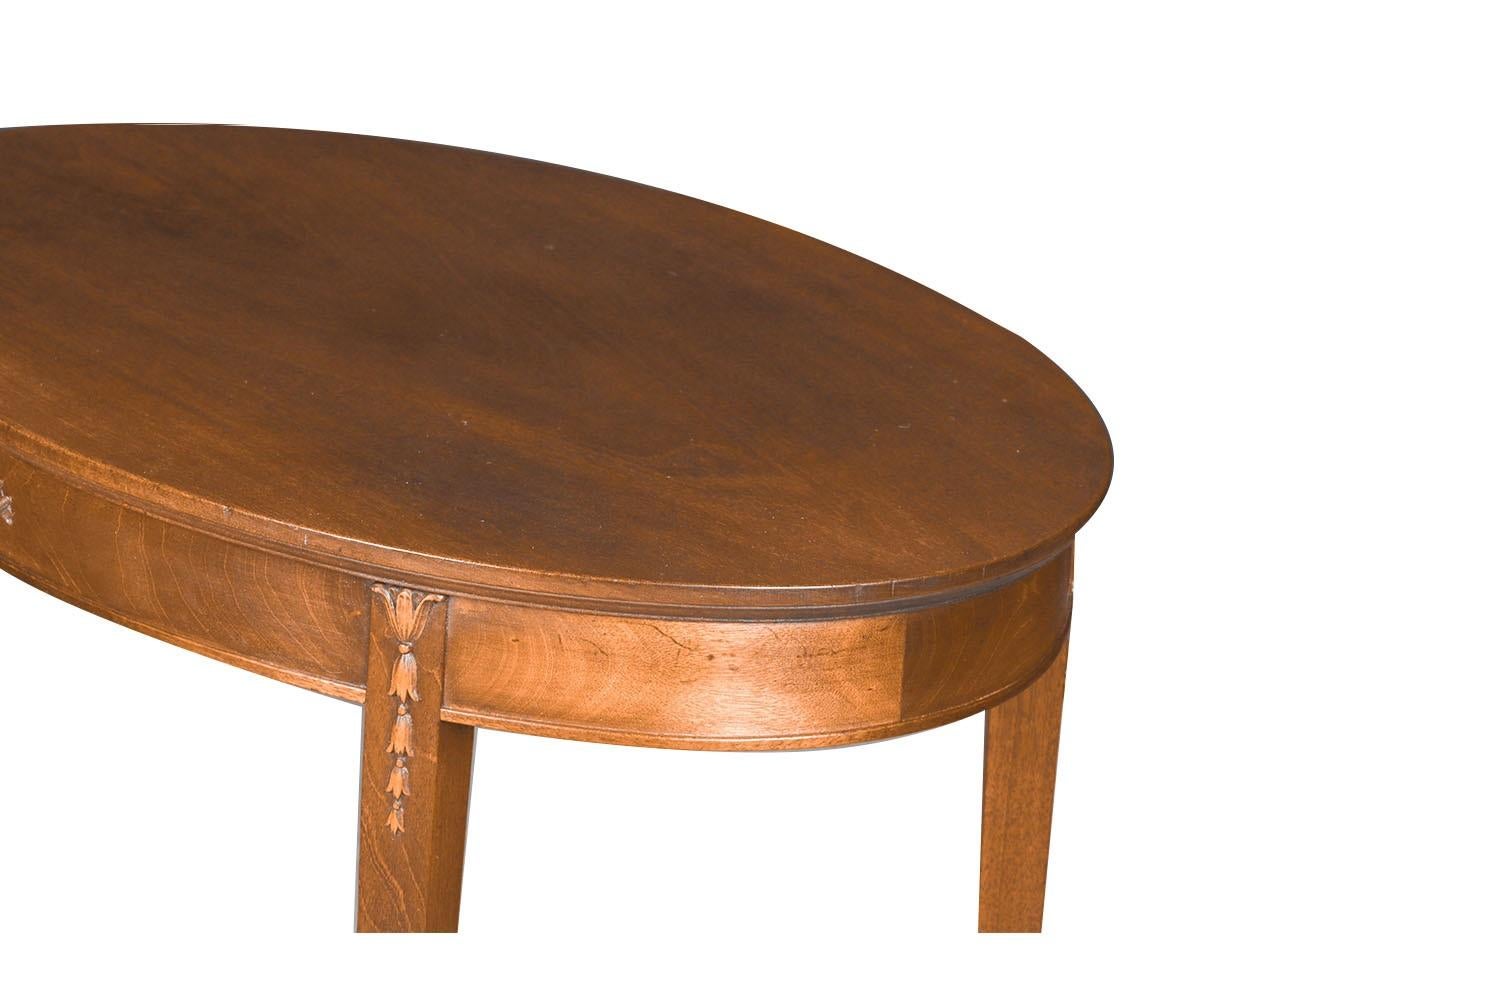 Antique English Hepplewhite Carved Bellflower Mahogany Caned Oval Side Table For Sale 5